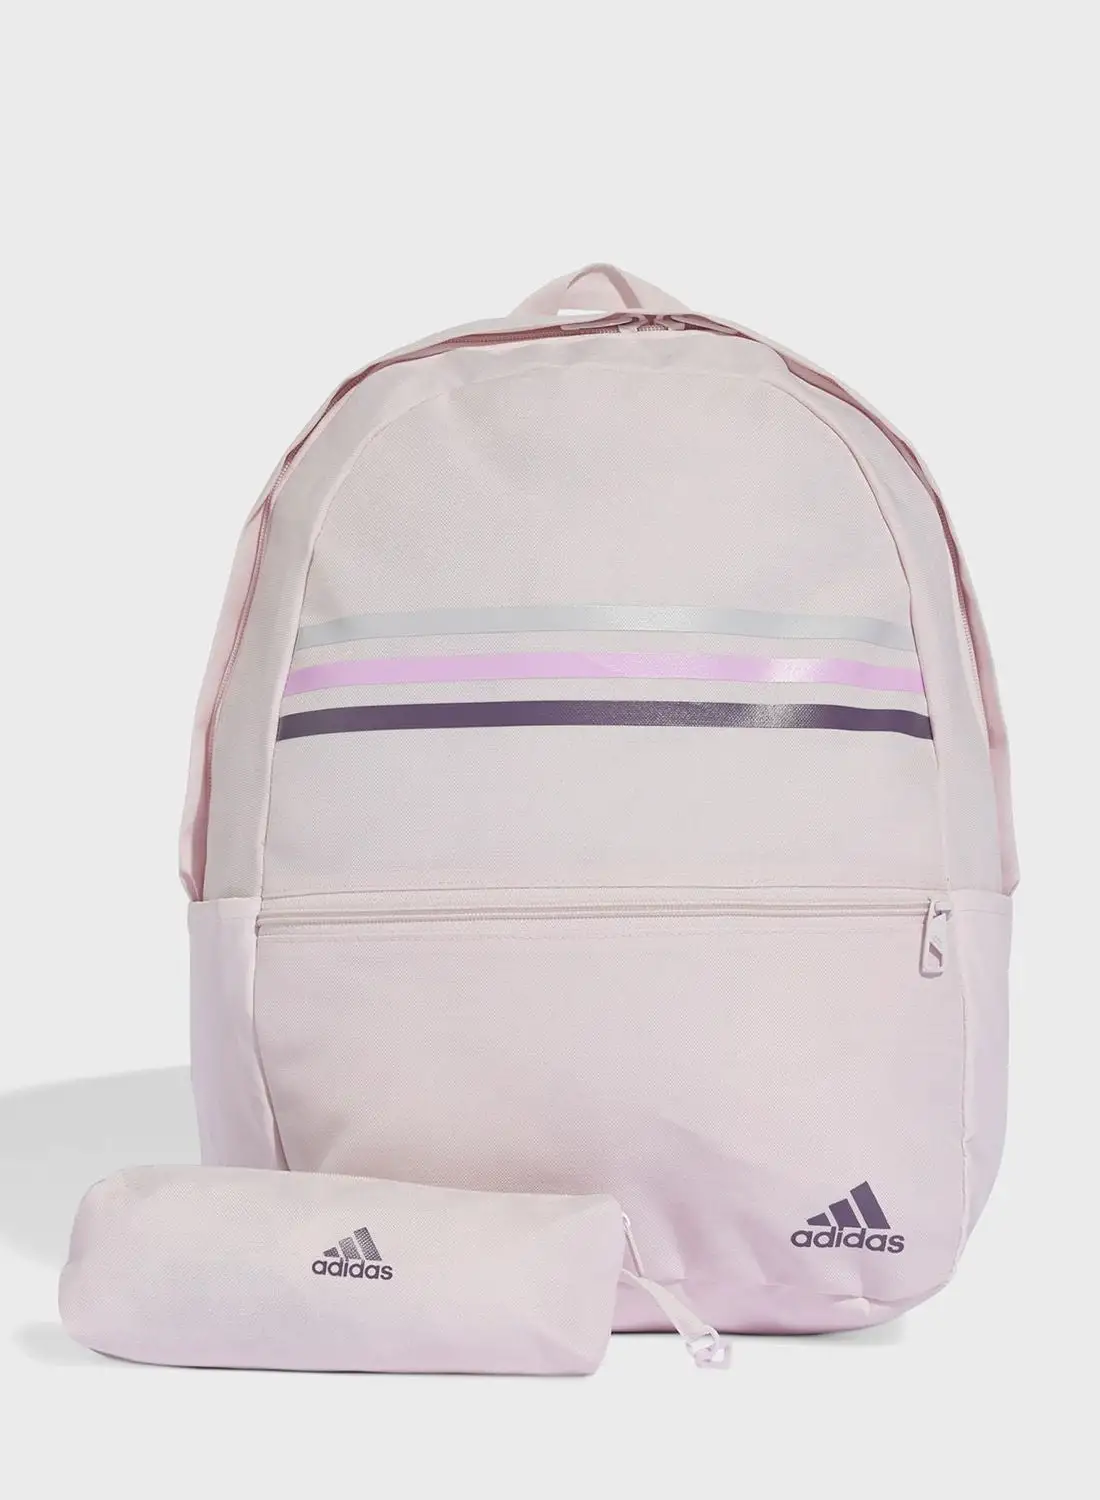 Adidas 3 Stripes Classic Backpack